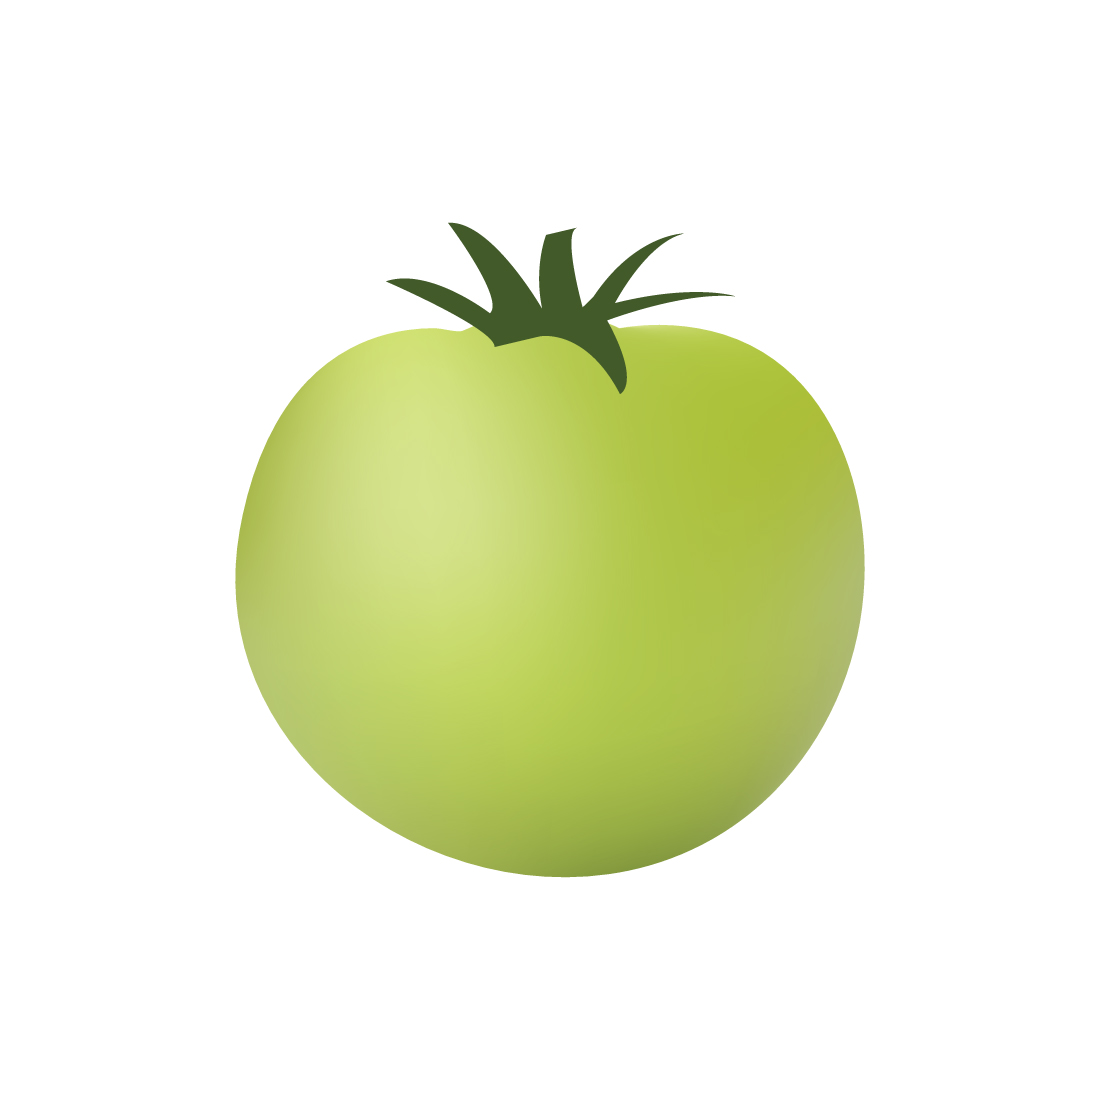 Green Tomato Illustration On White Background preview image.